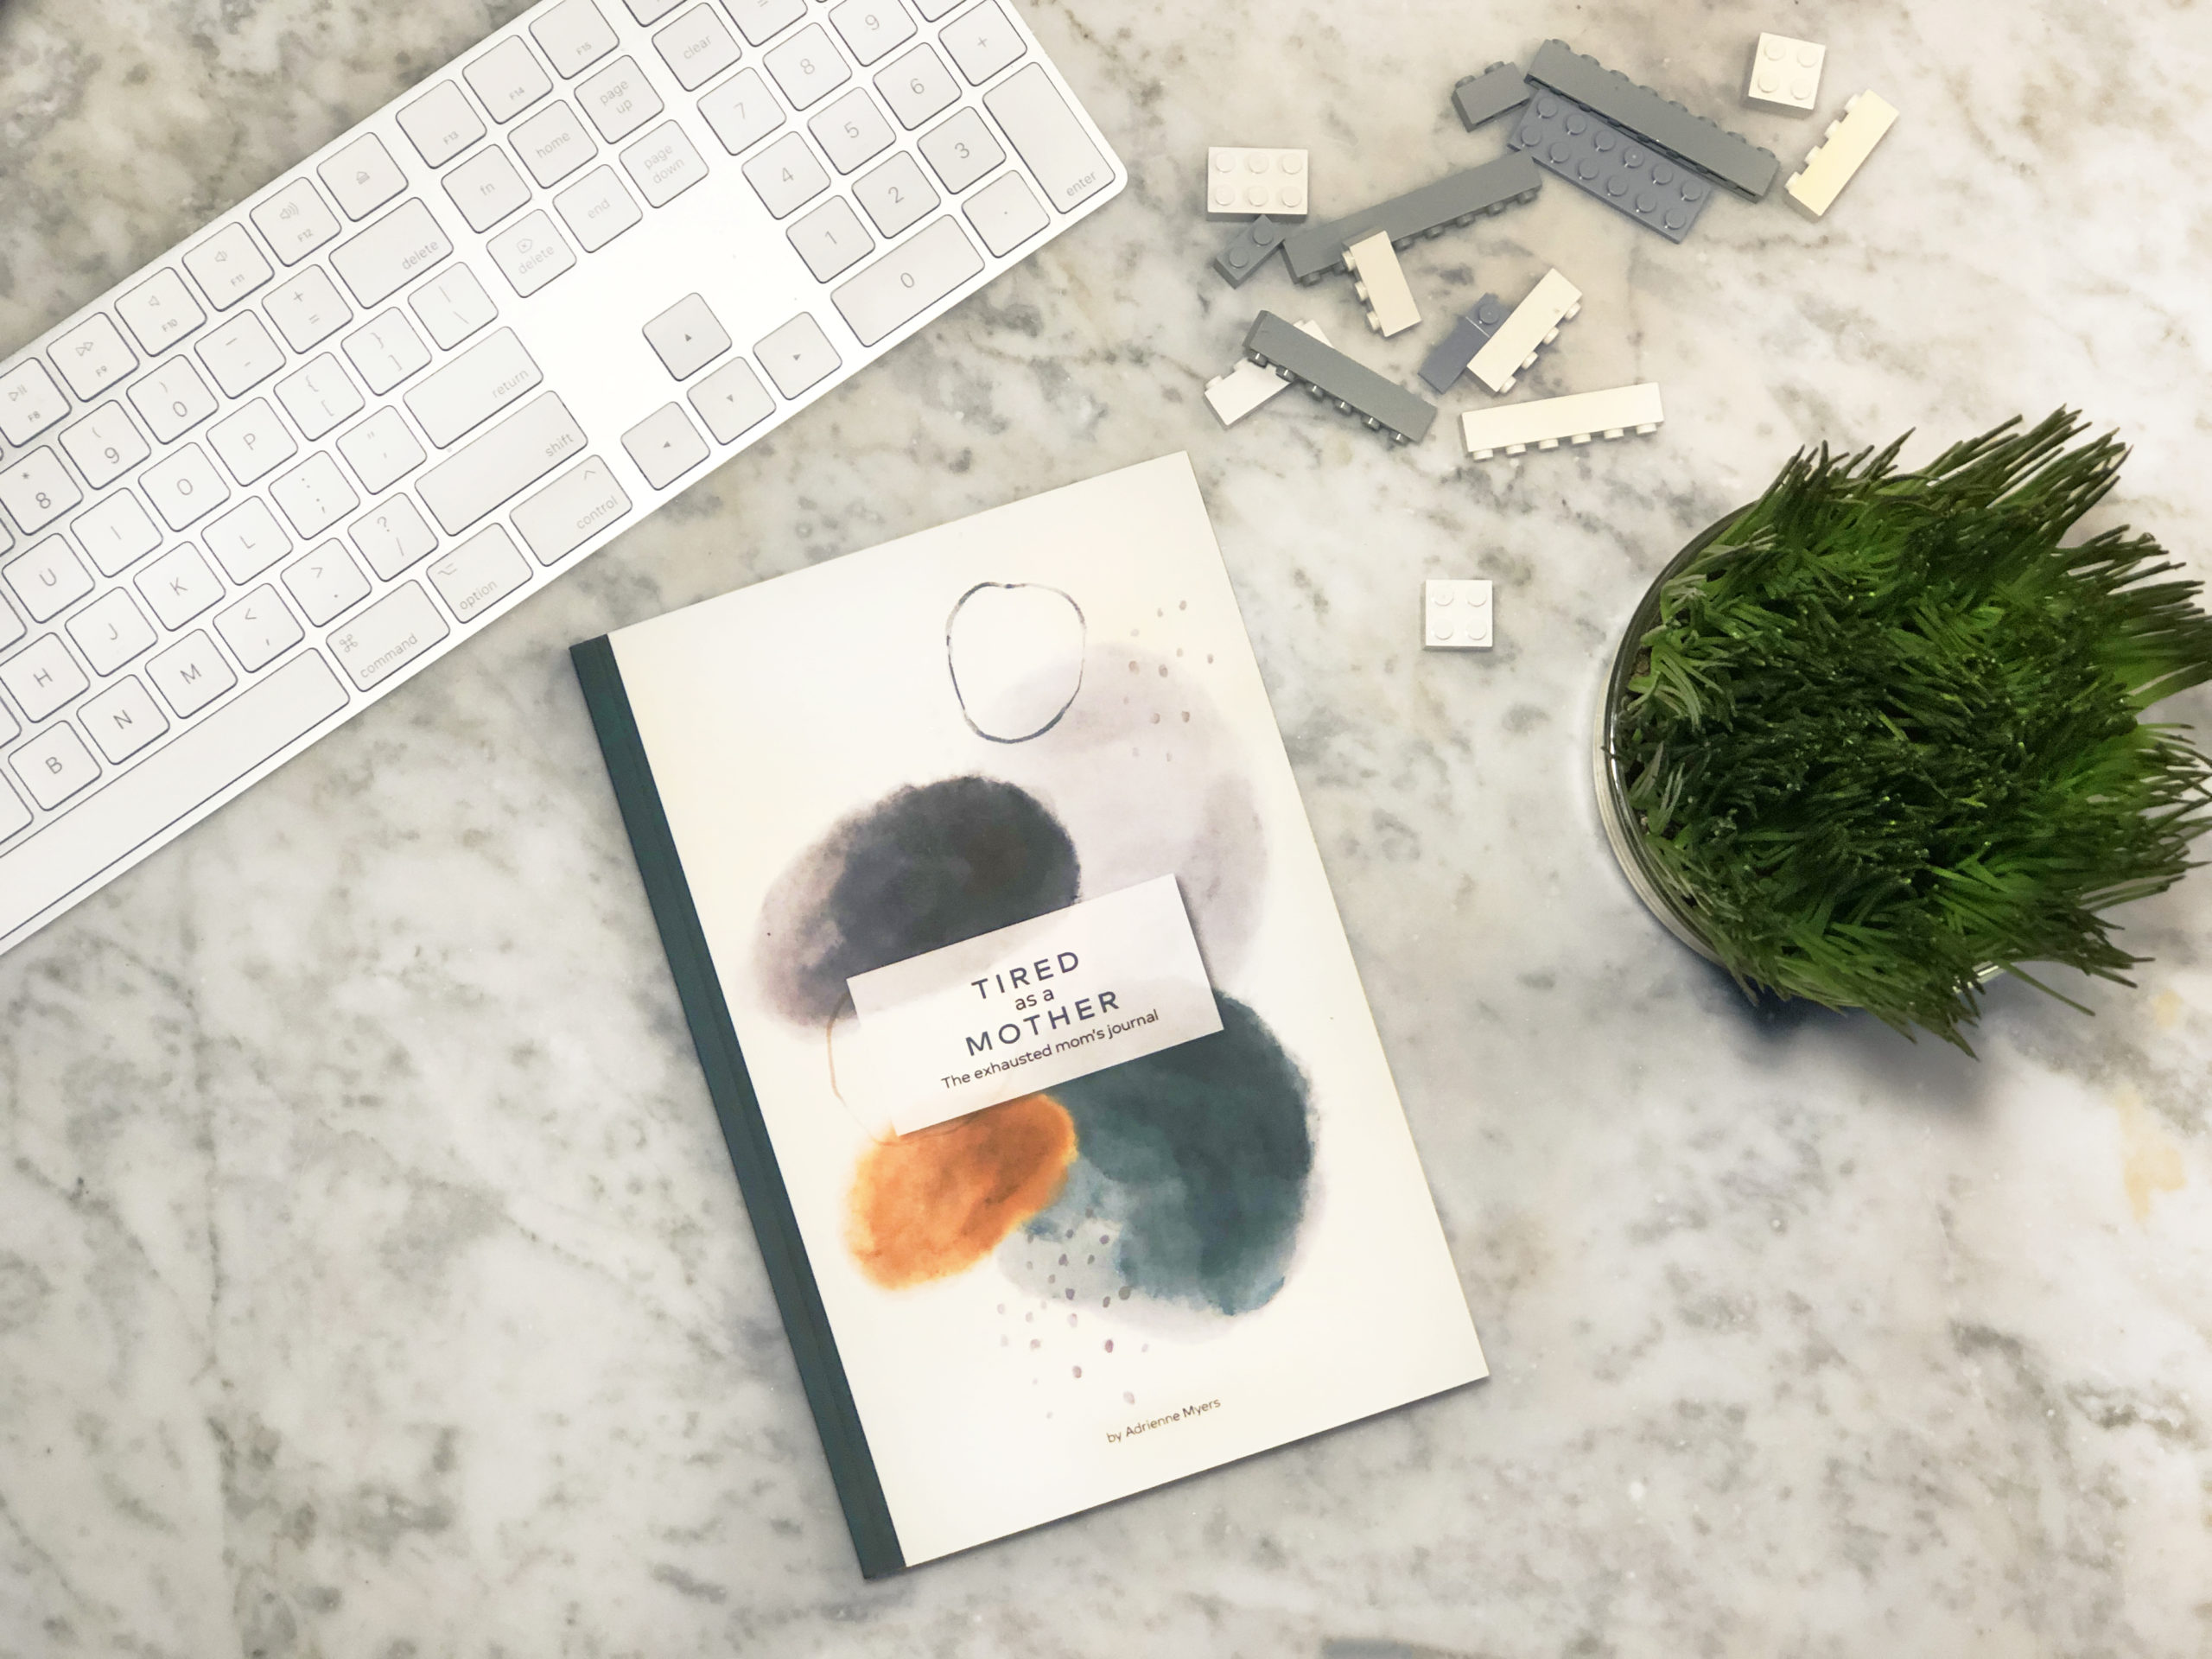 Tired as a mother: the exhausted mom's journal book on a white and grey marble background with keyboard, legos and plant